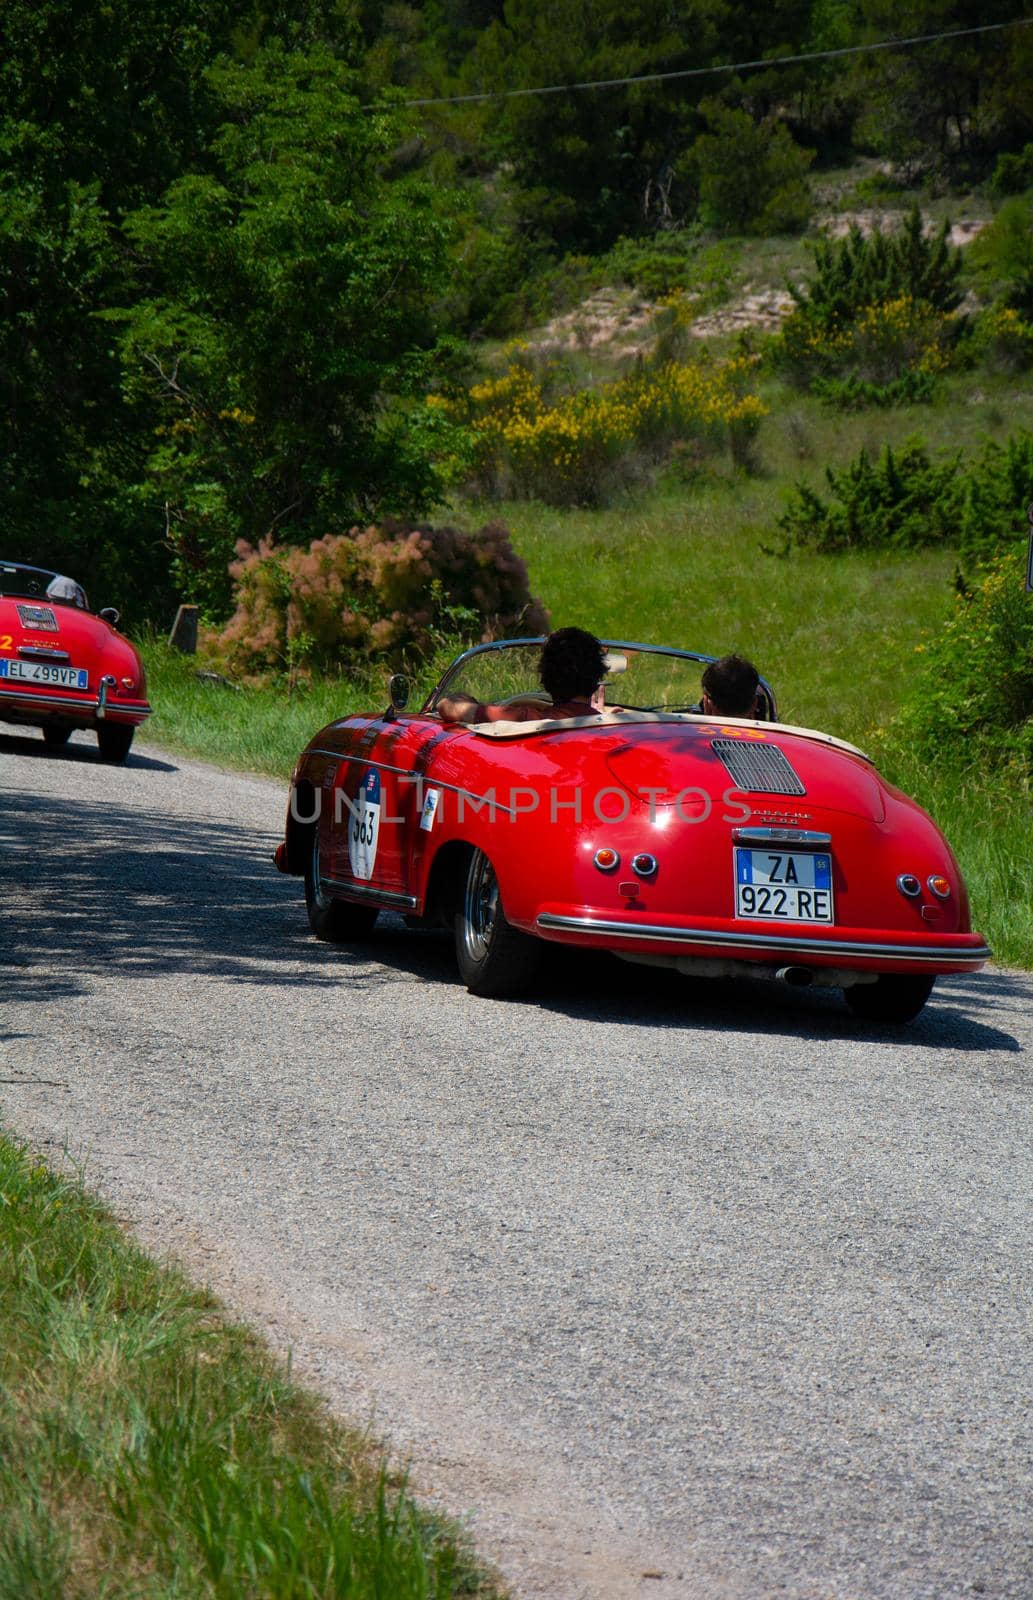 URBINO - ITALY - JUN 16 - 2022 : PORSCHE 356 1500 SPEEDSTER 1955 on an old racing car in rally Mille Miglia 2022 the famous italian historical race (1927-1957